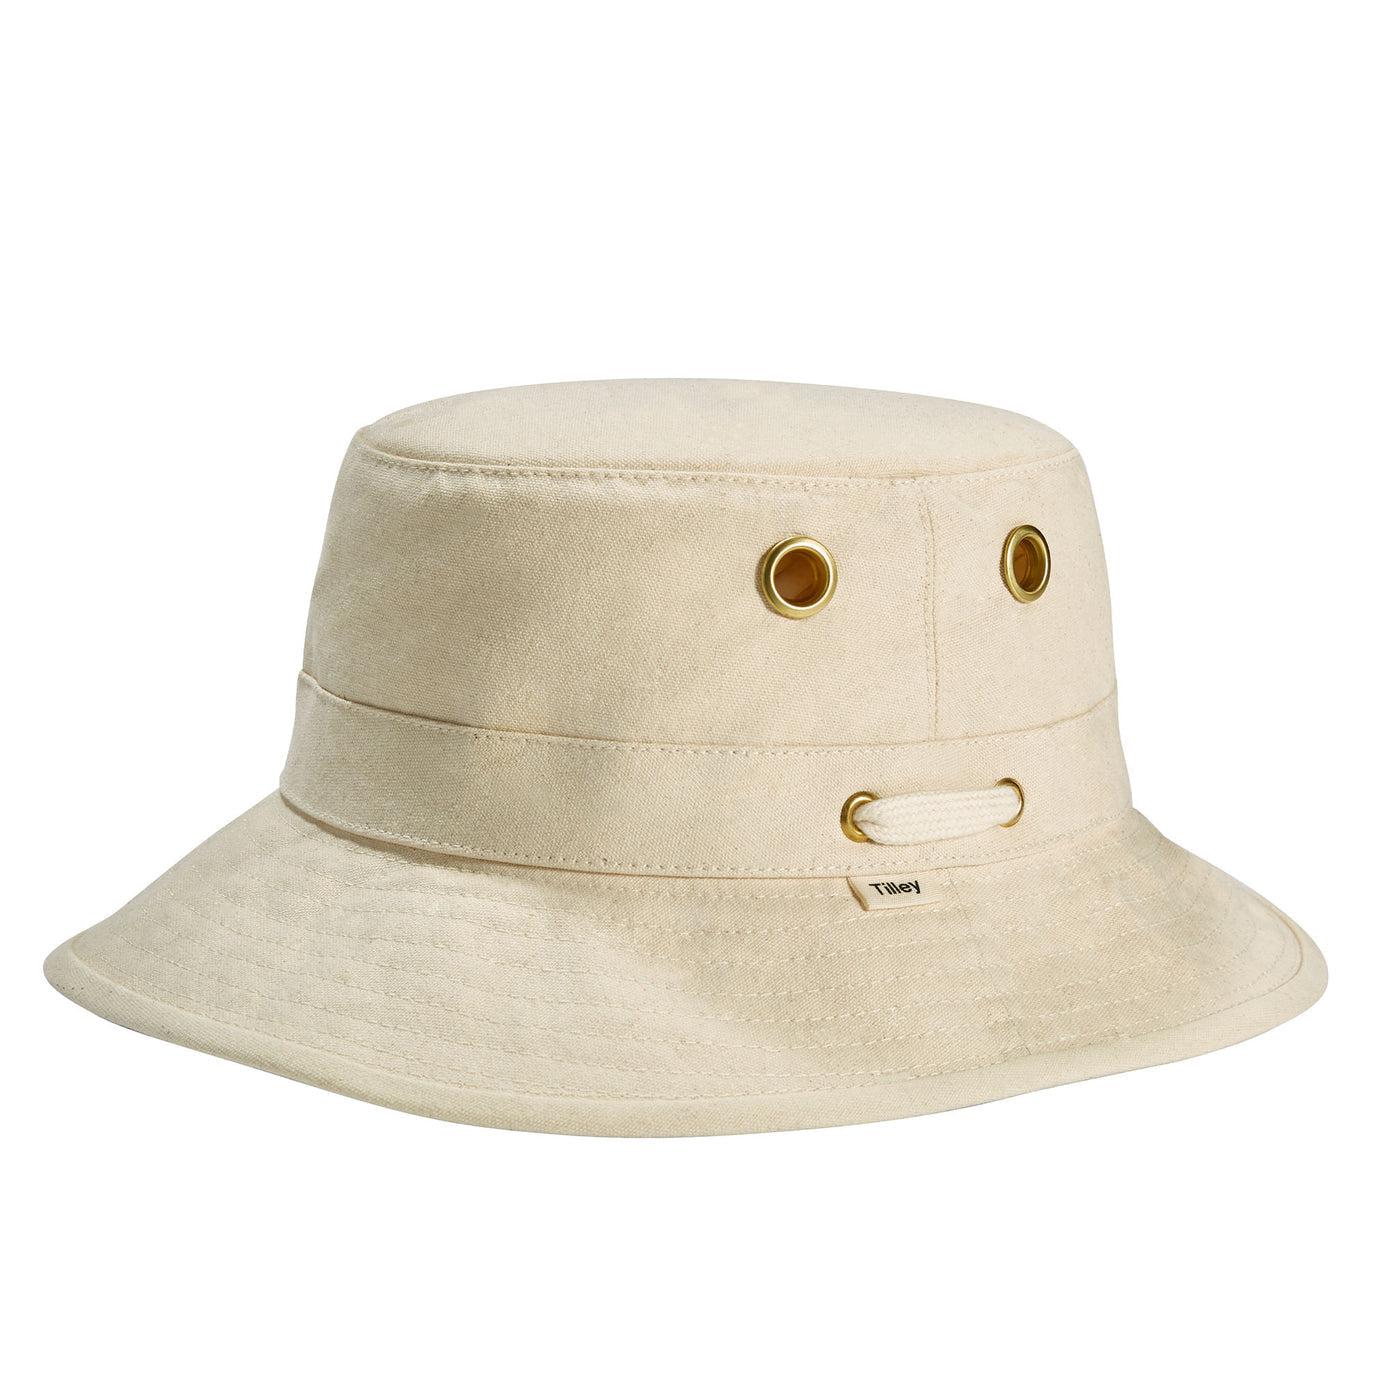 THE ICONIC T1 BUCKET HAT 7 3/4 / OLIVE